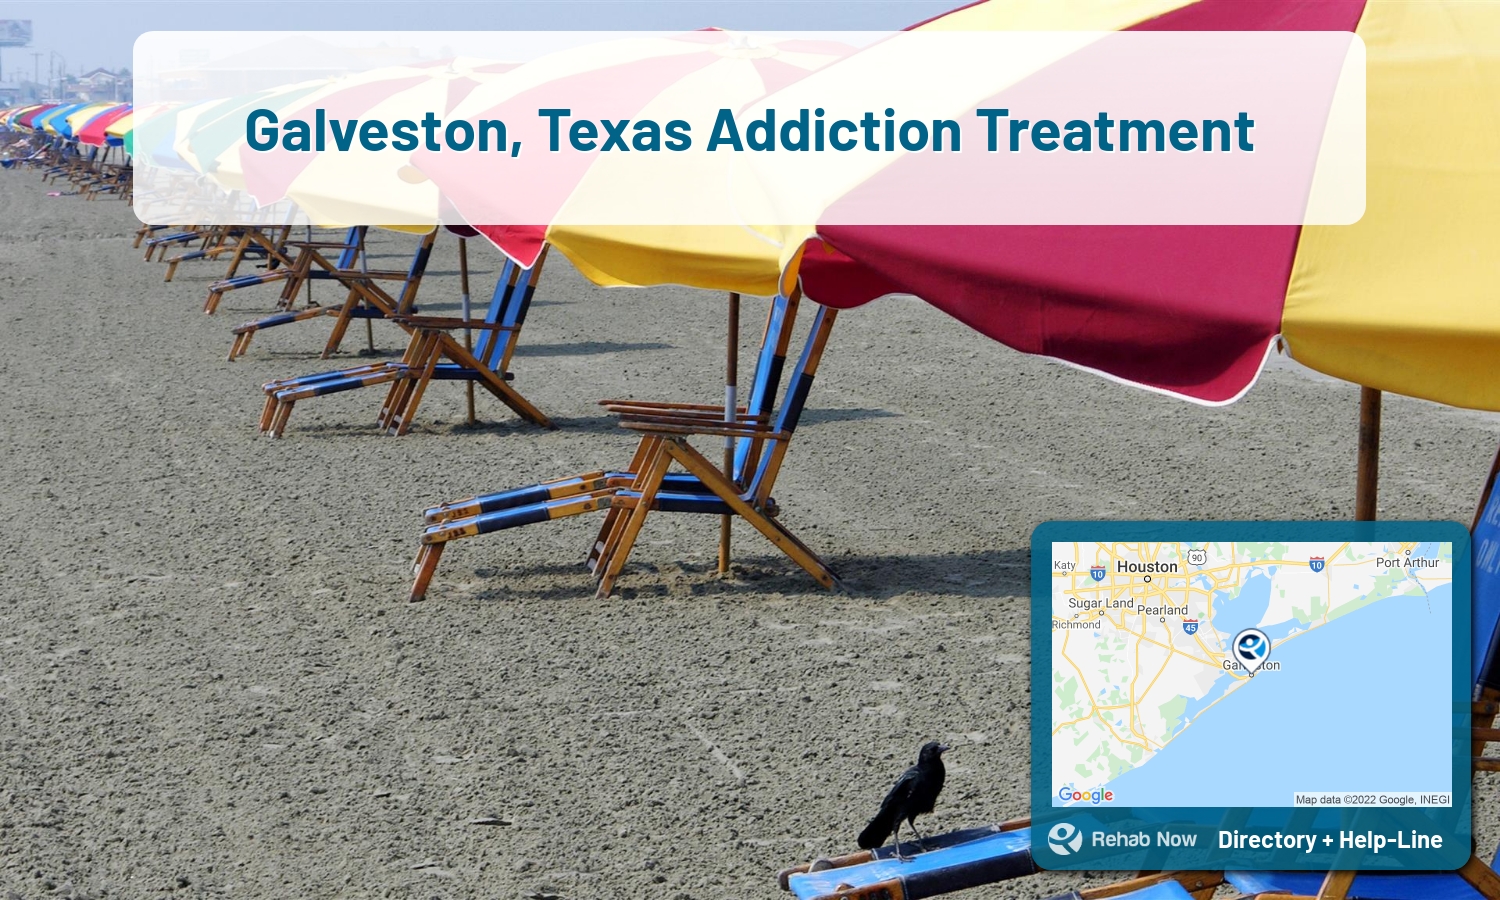 View options, availability, treatment methods, and more, for drug rehab and alcohol treatment in Galveston, Texas